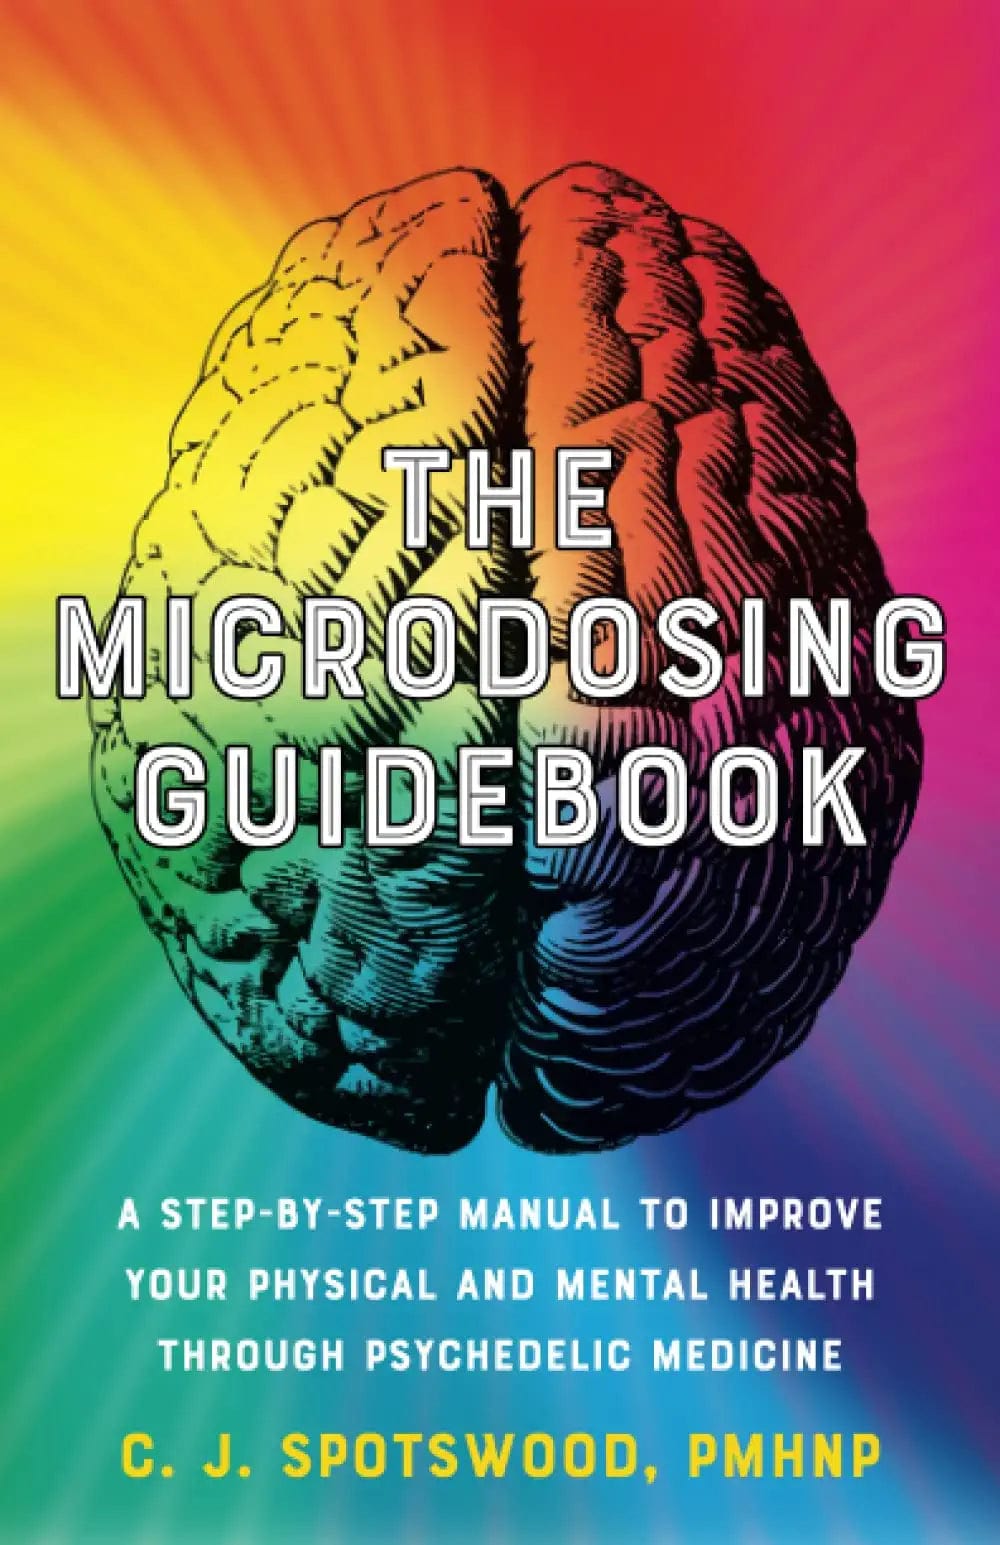 Microdosing Guidbook: Step-by-Step Manual to Improve Your Physical and Mental Health through Psychedelic Medicine - Third Eye